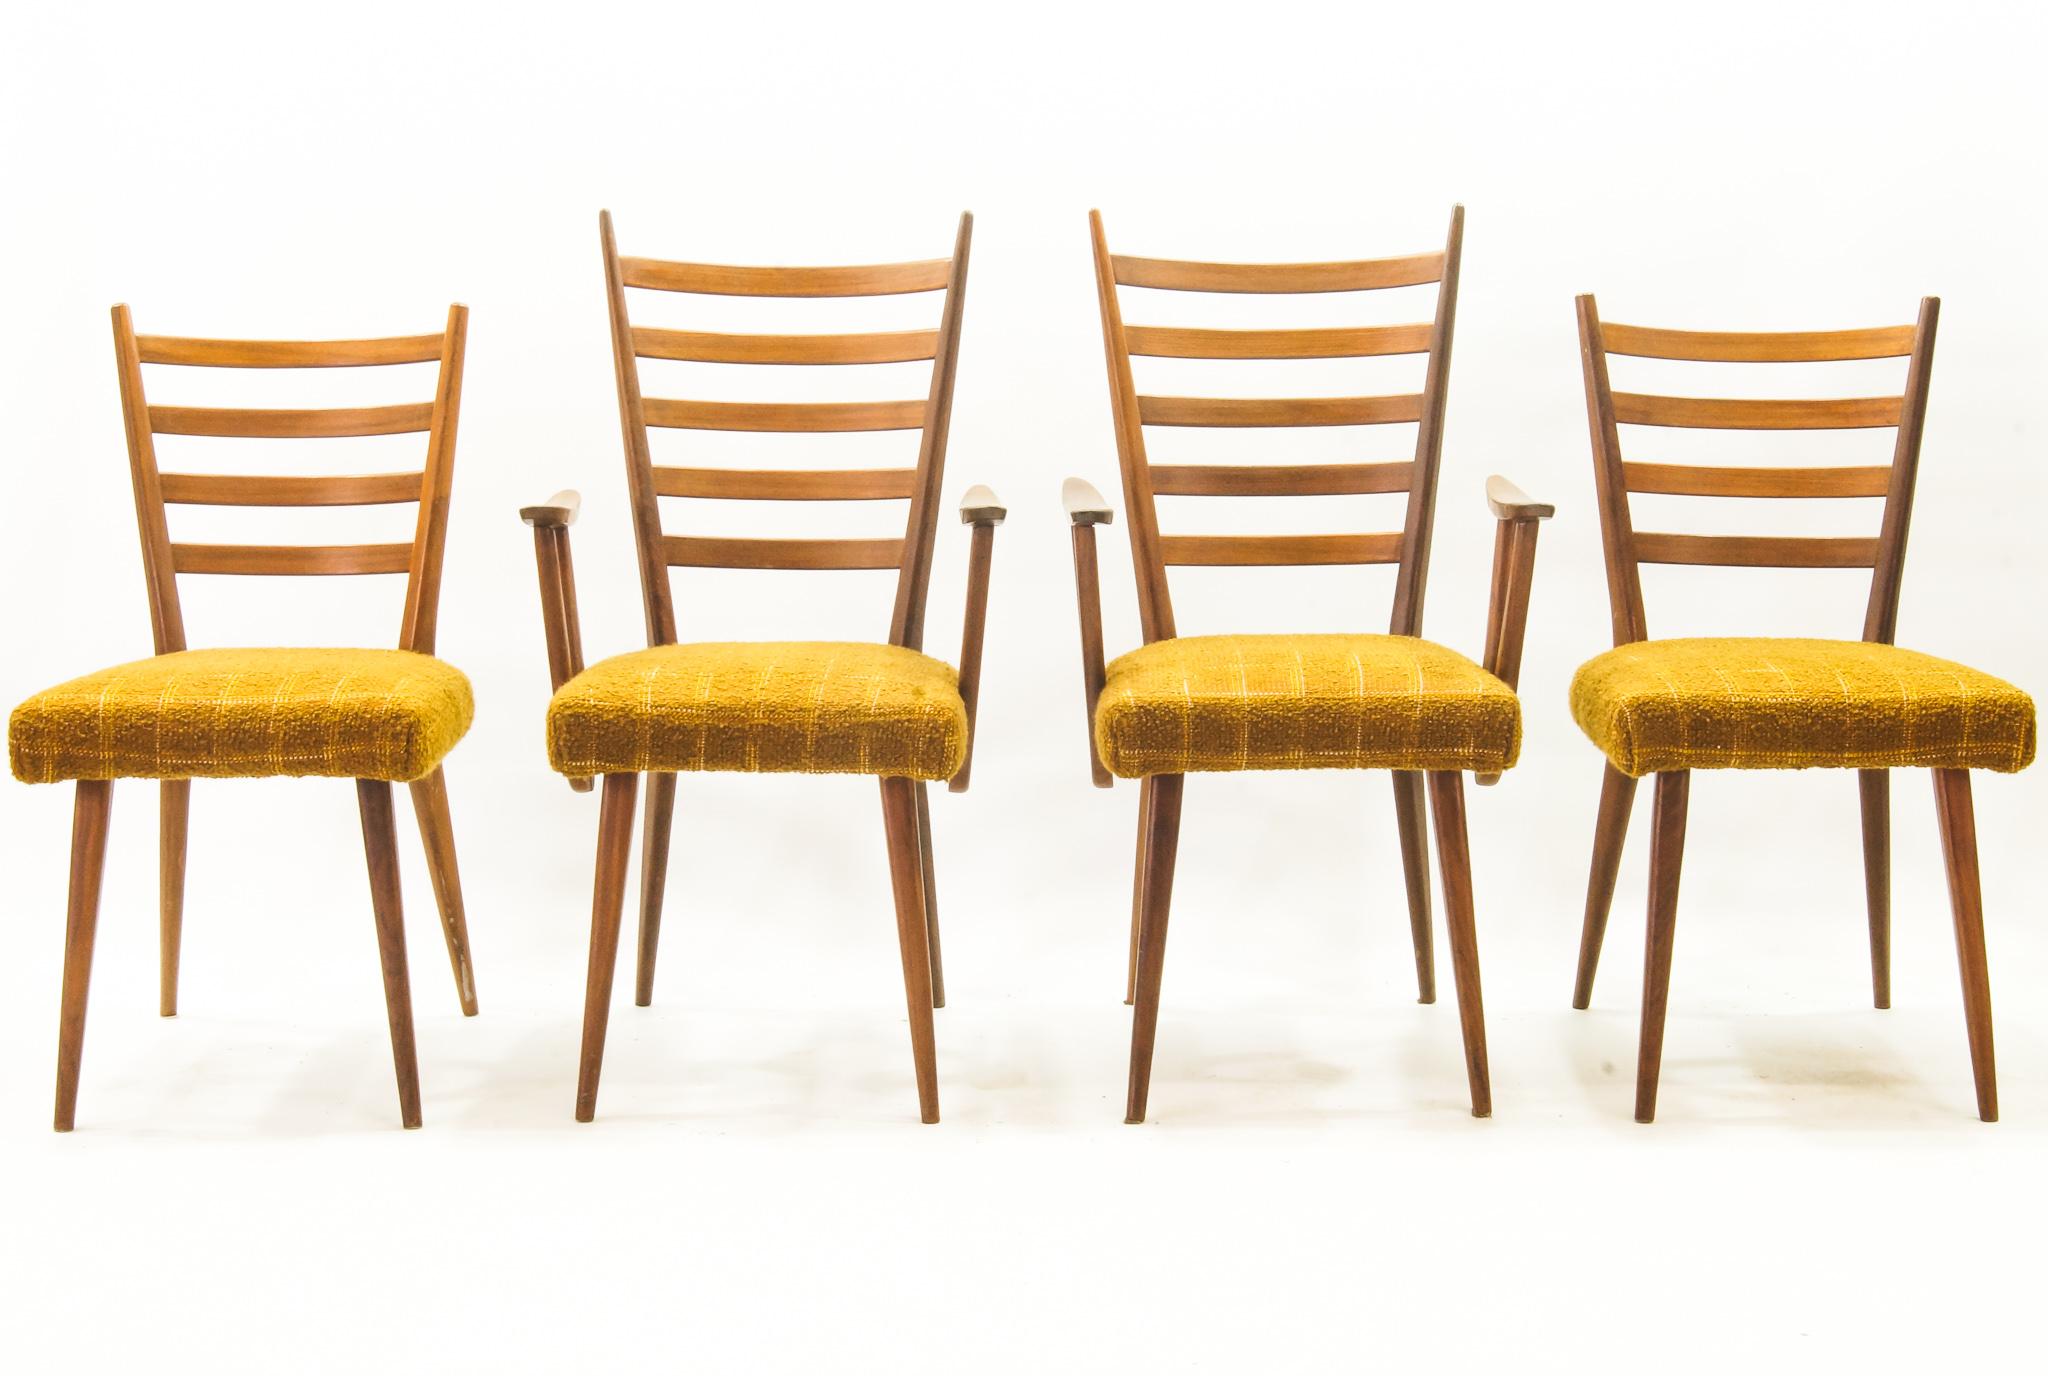 Dutch Cees Braakman for Pastoe - Ladder Chairs, 1950's - Dinerset of 6